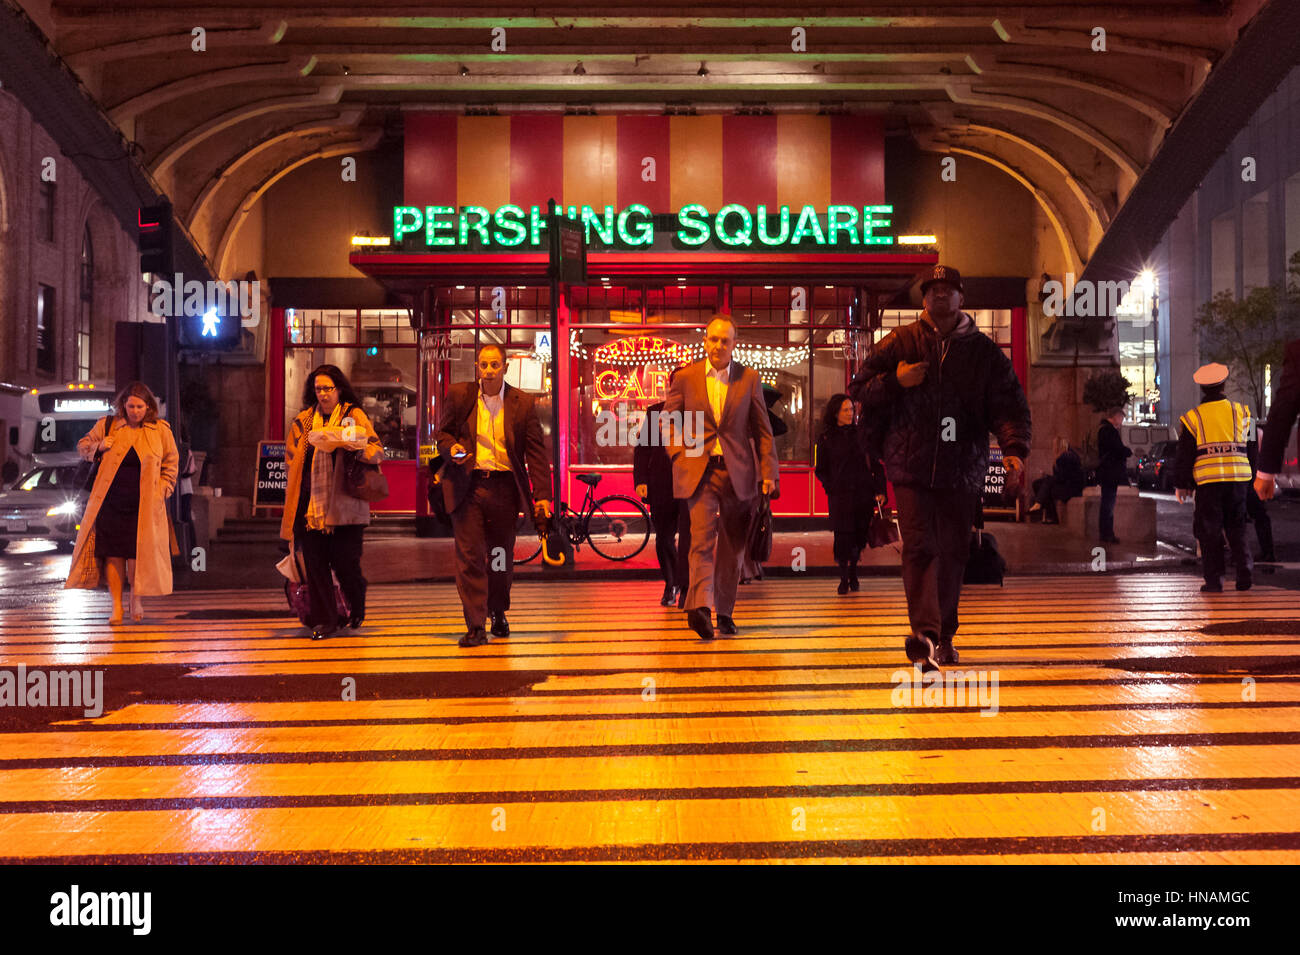 looking at pershing square by night Stock Photo